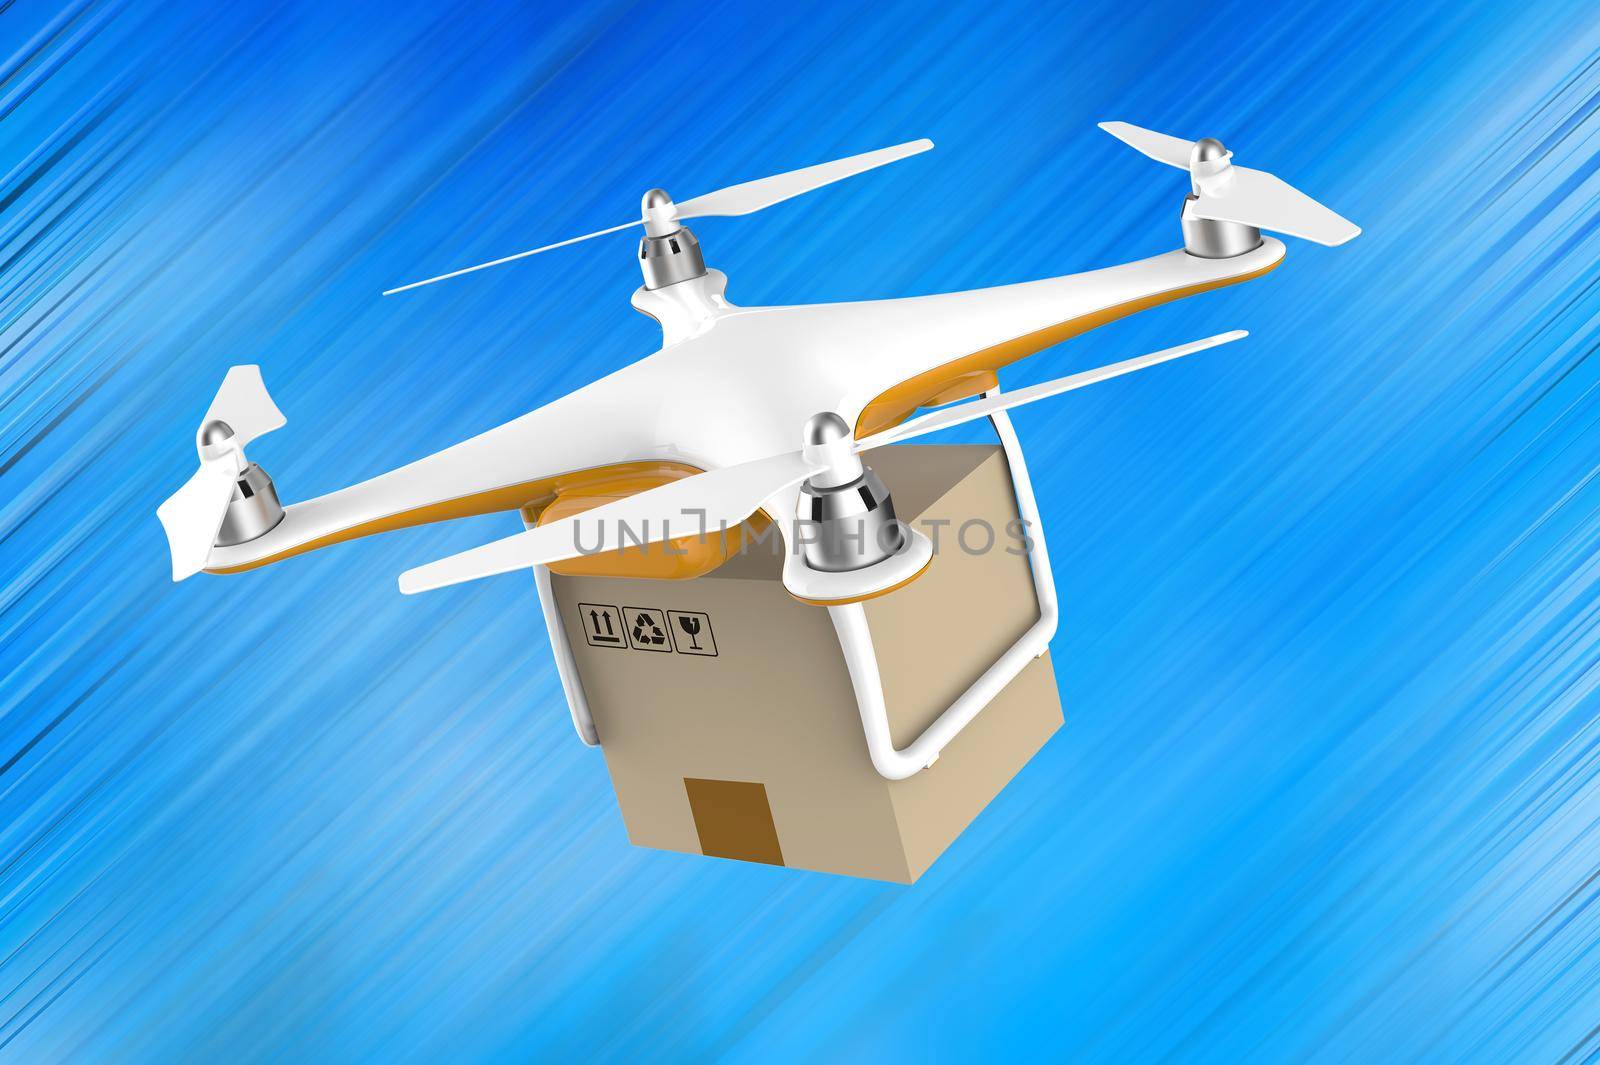 Drone flying with a delivery box package on a blue background: 3D rendering